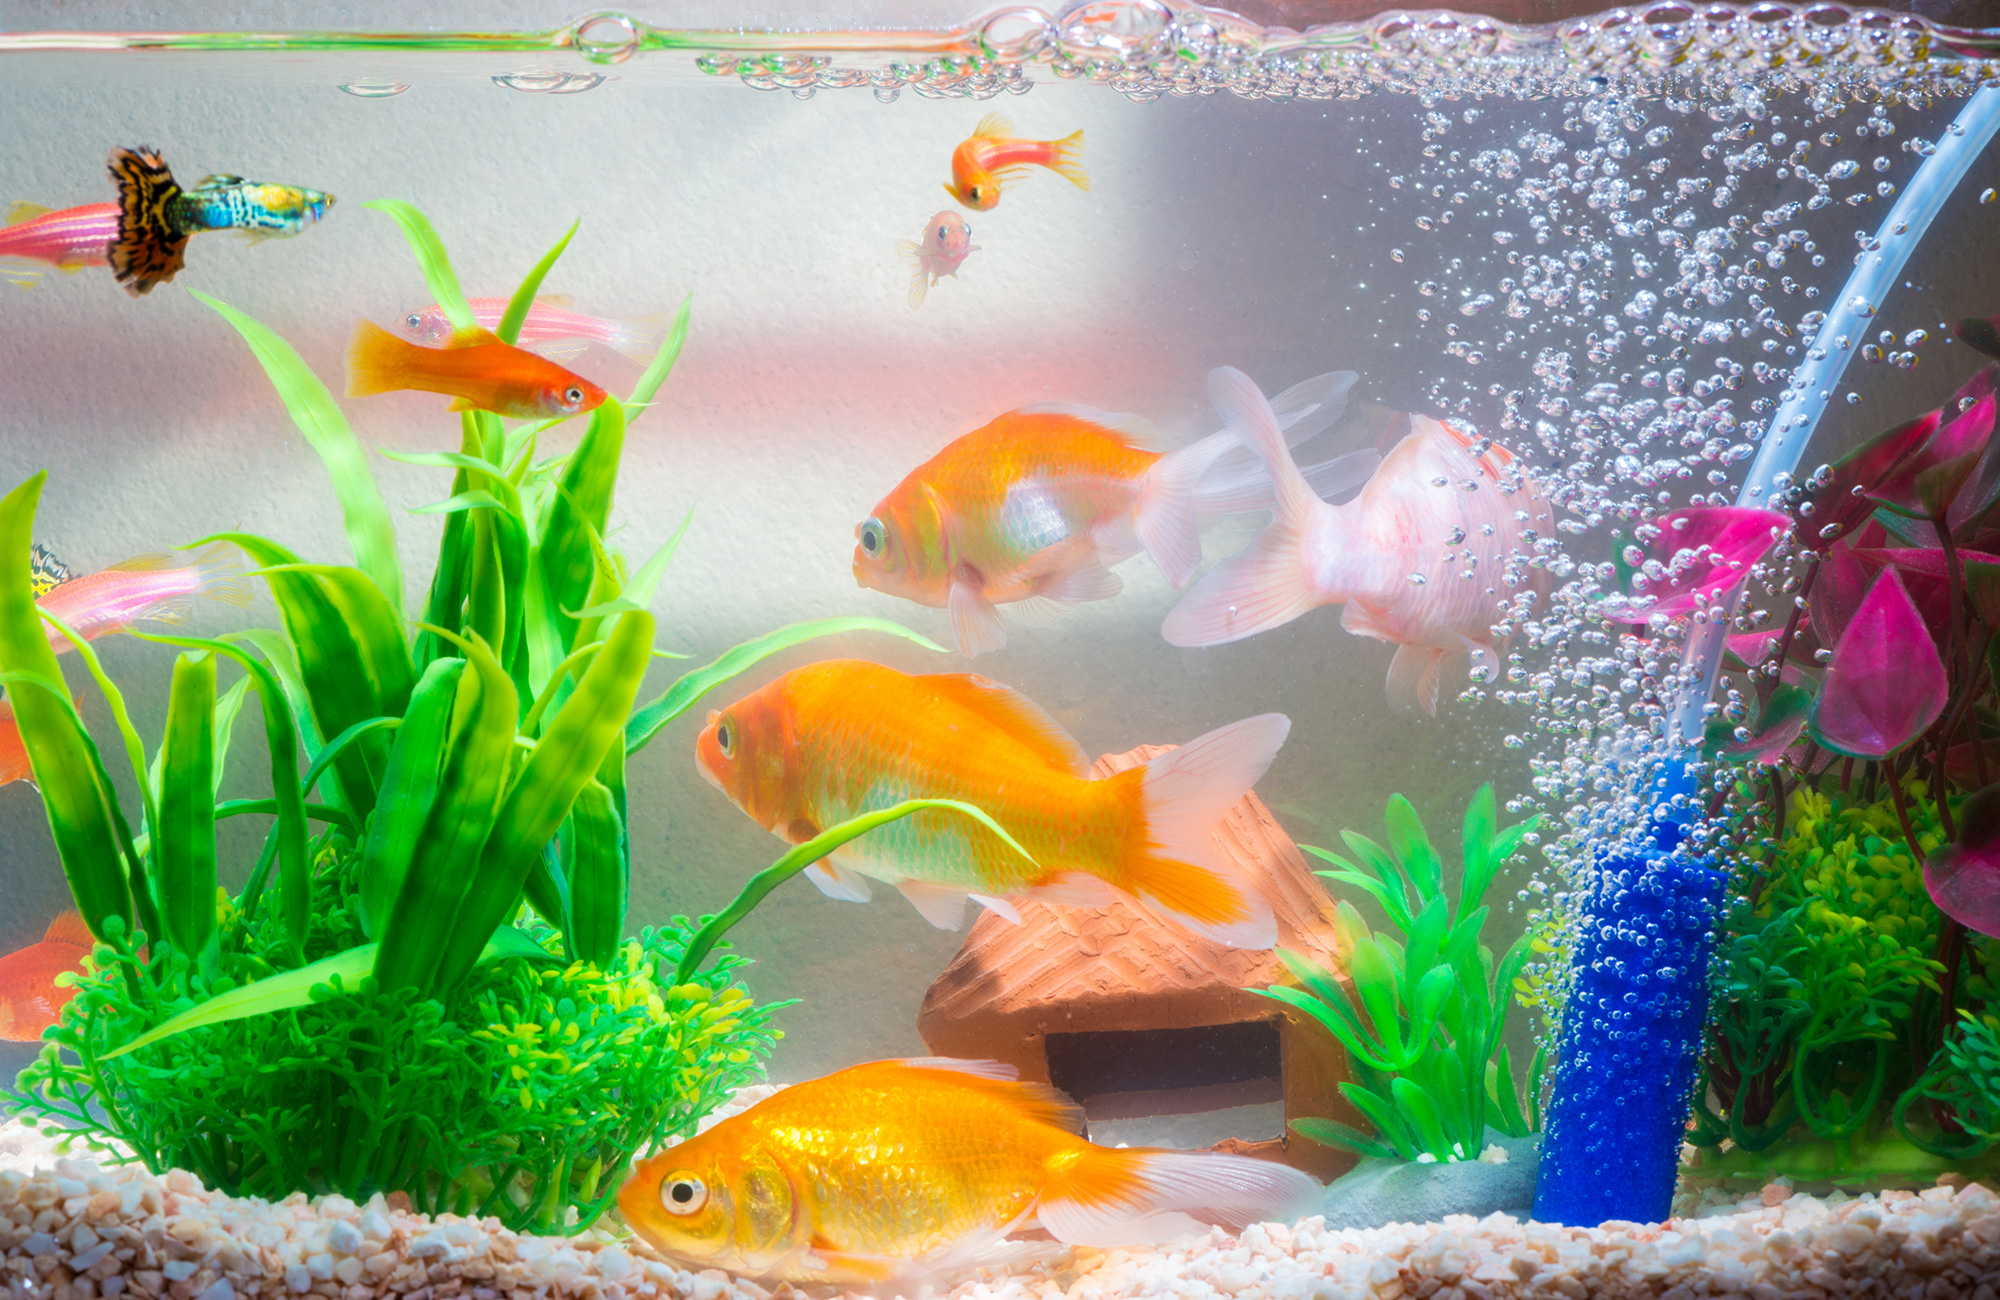 How to cycle a fish tank?